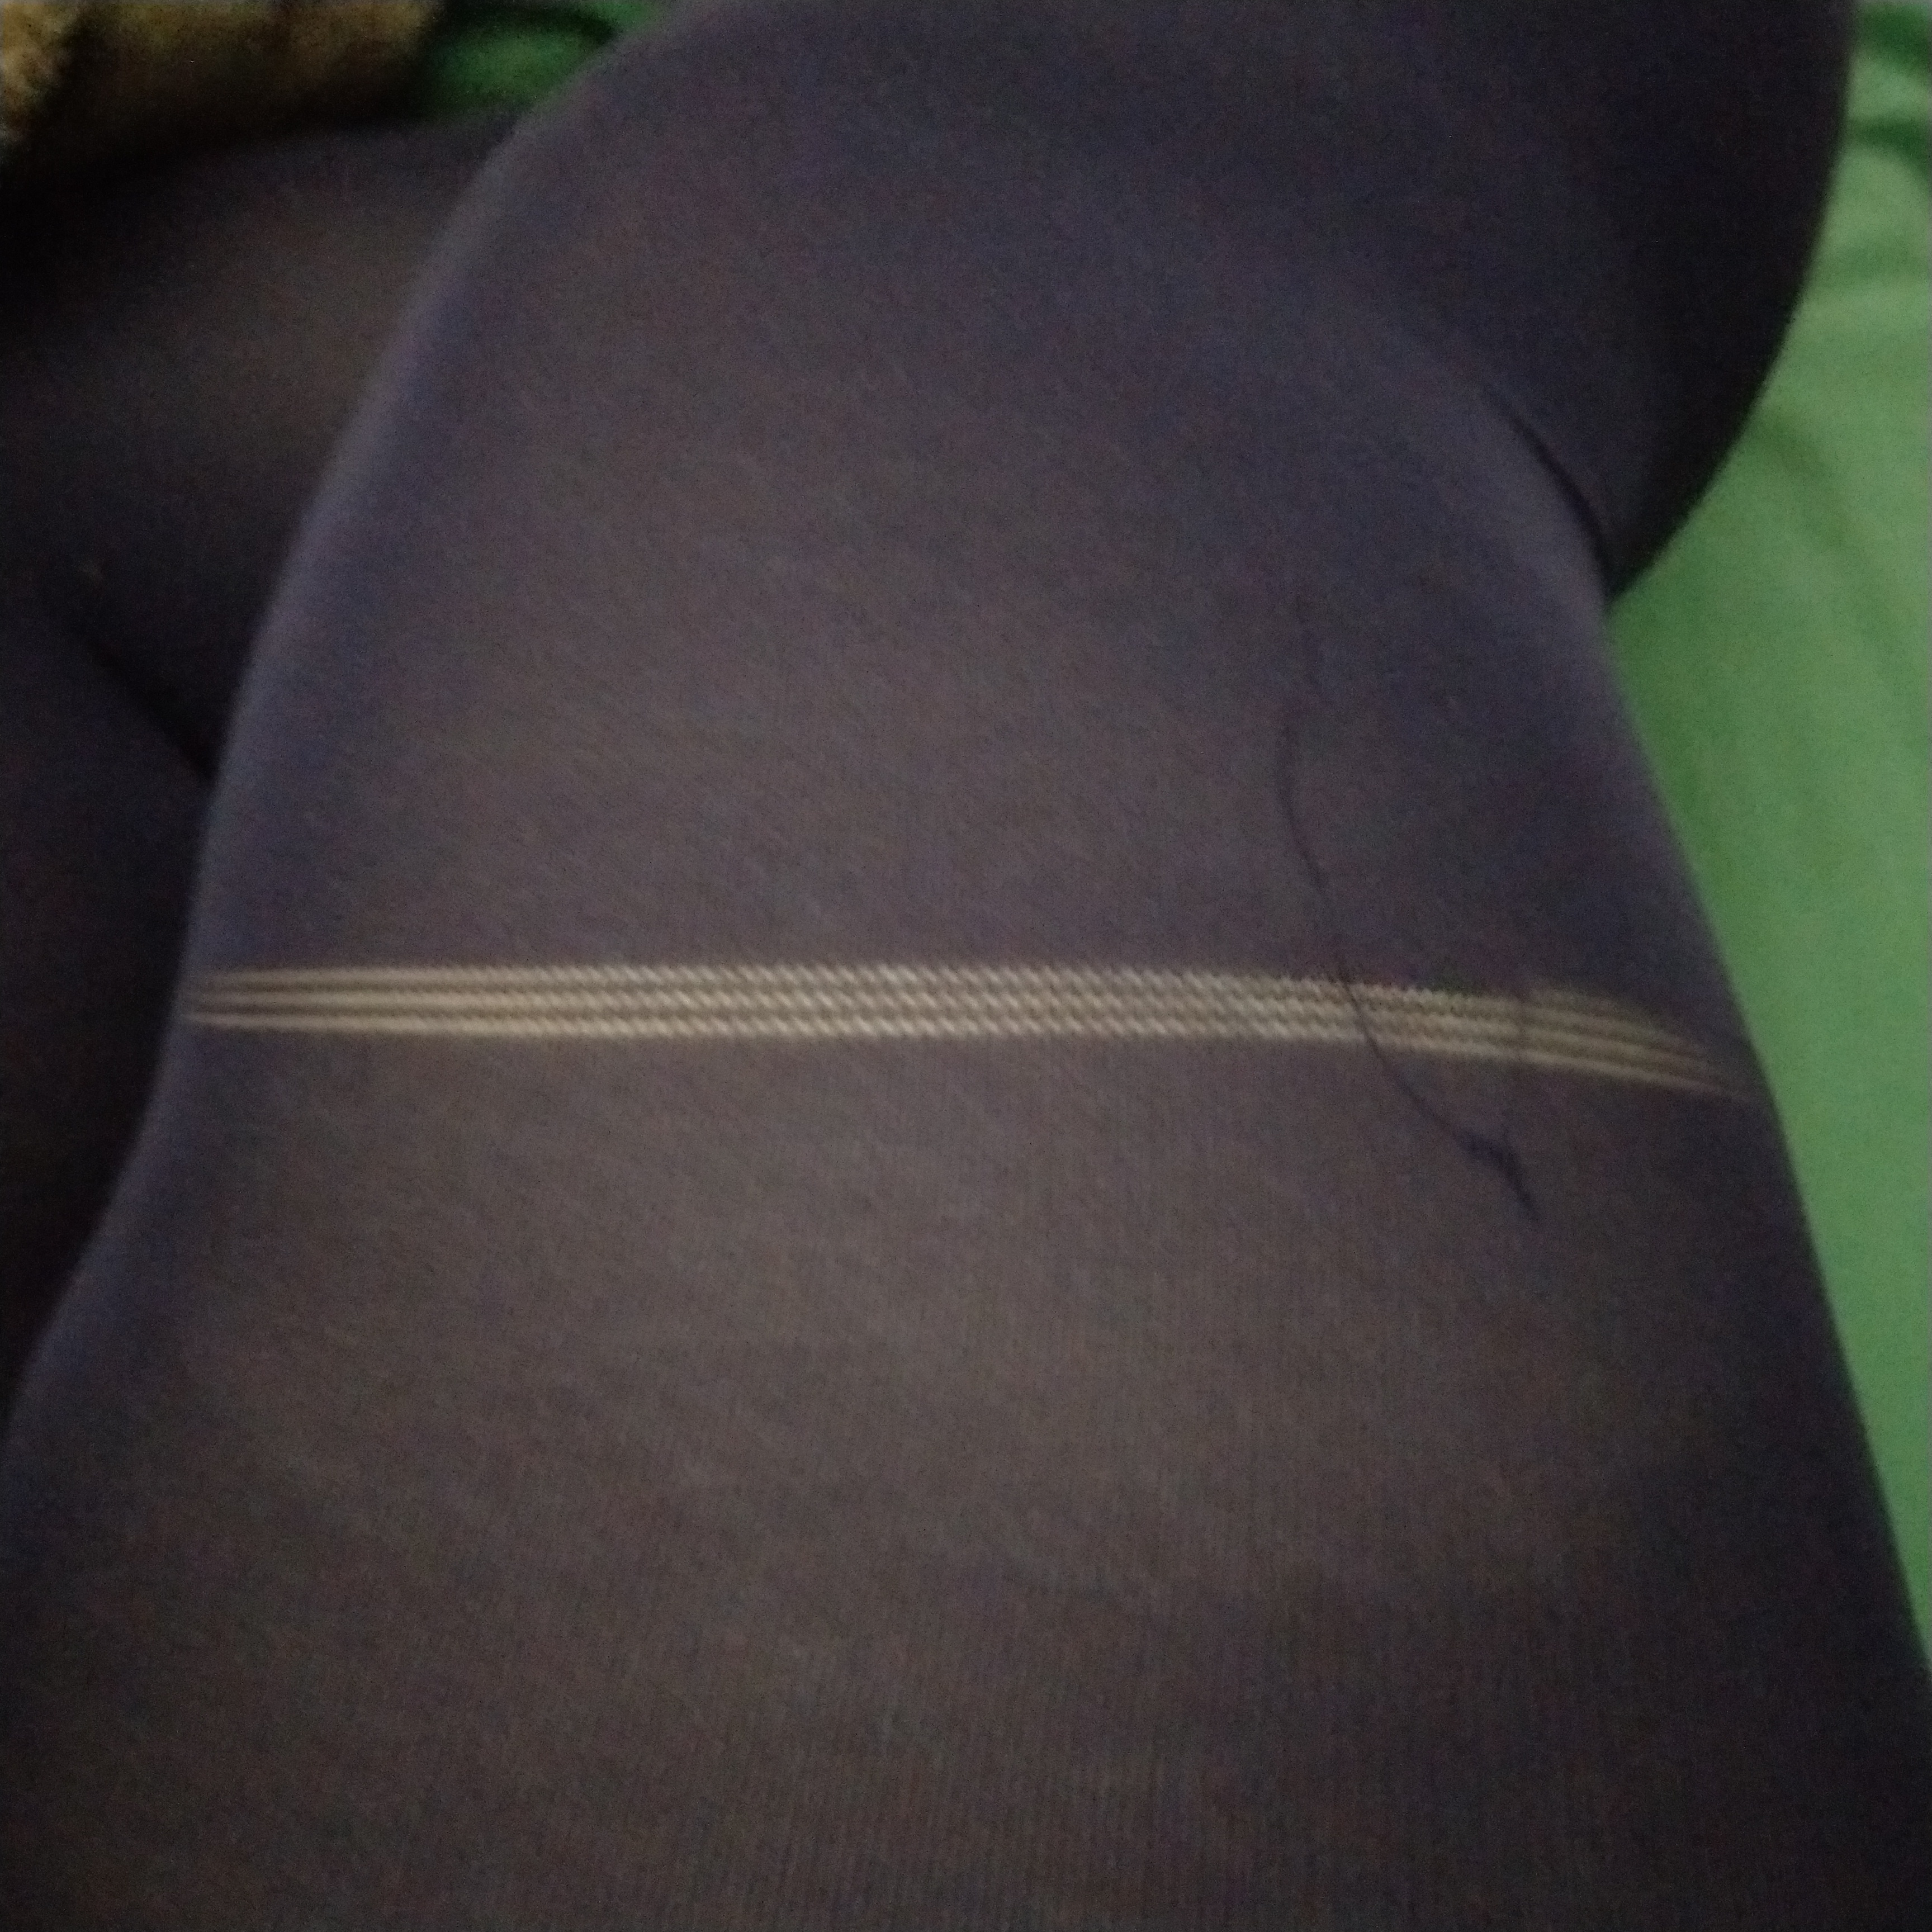 Honest review of chub rub tights from snag. HD 1080p 